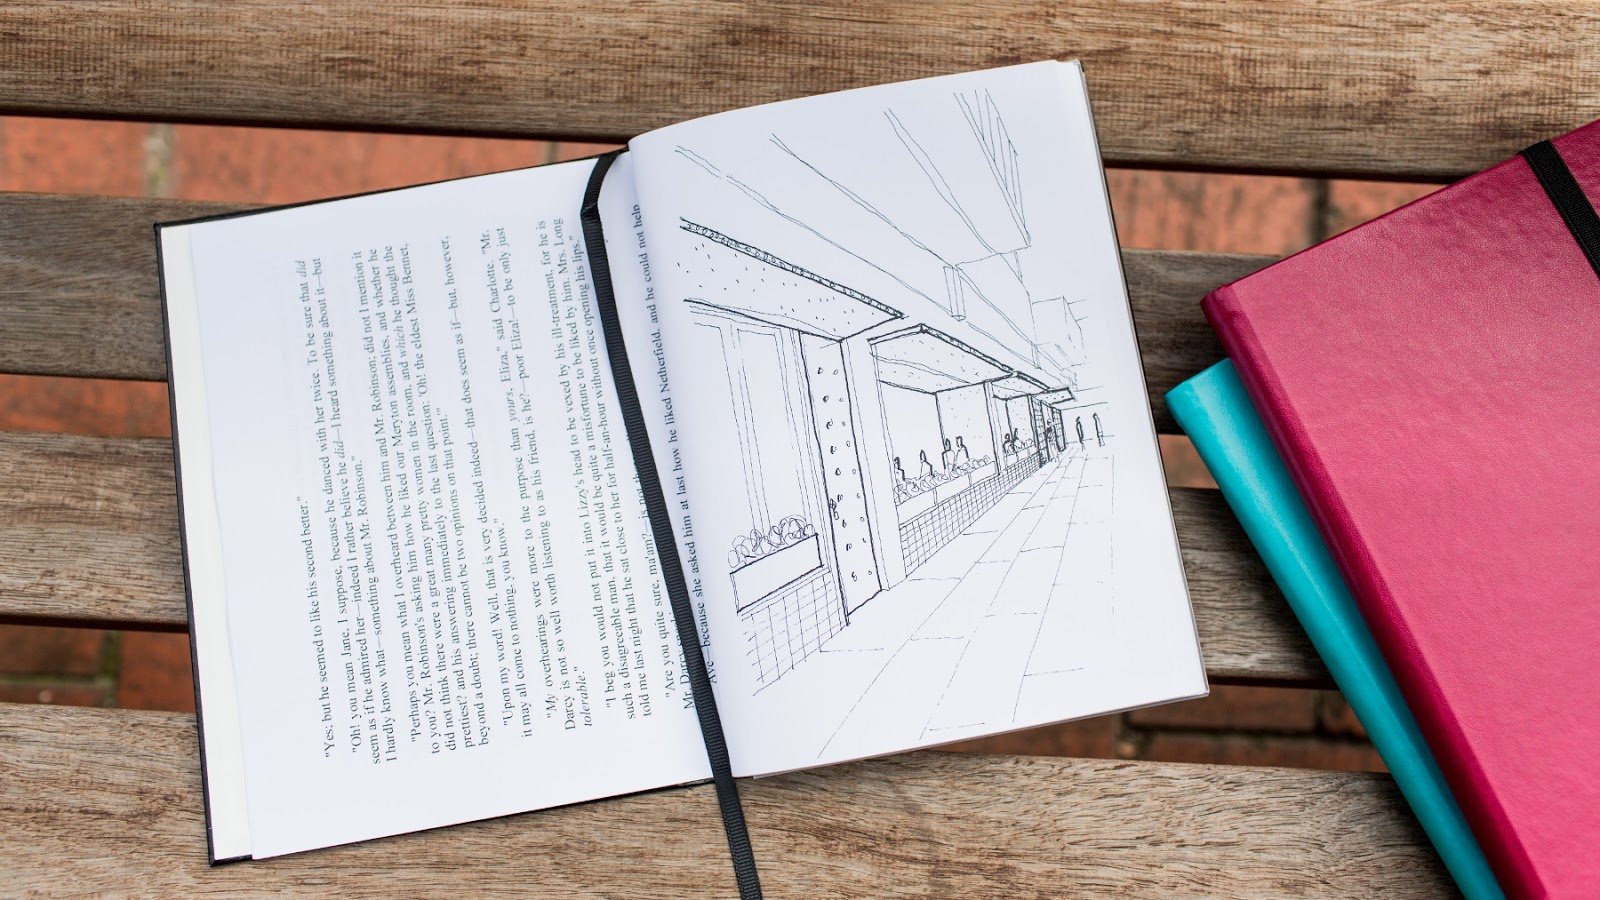 how-we-invented-and-launched-a-notebook-that-saves-paper